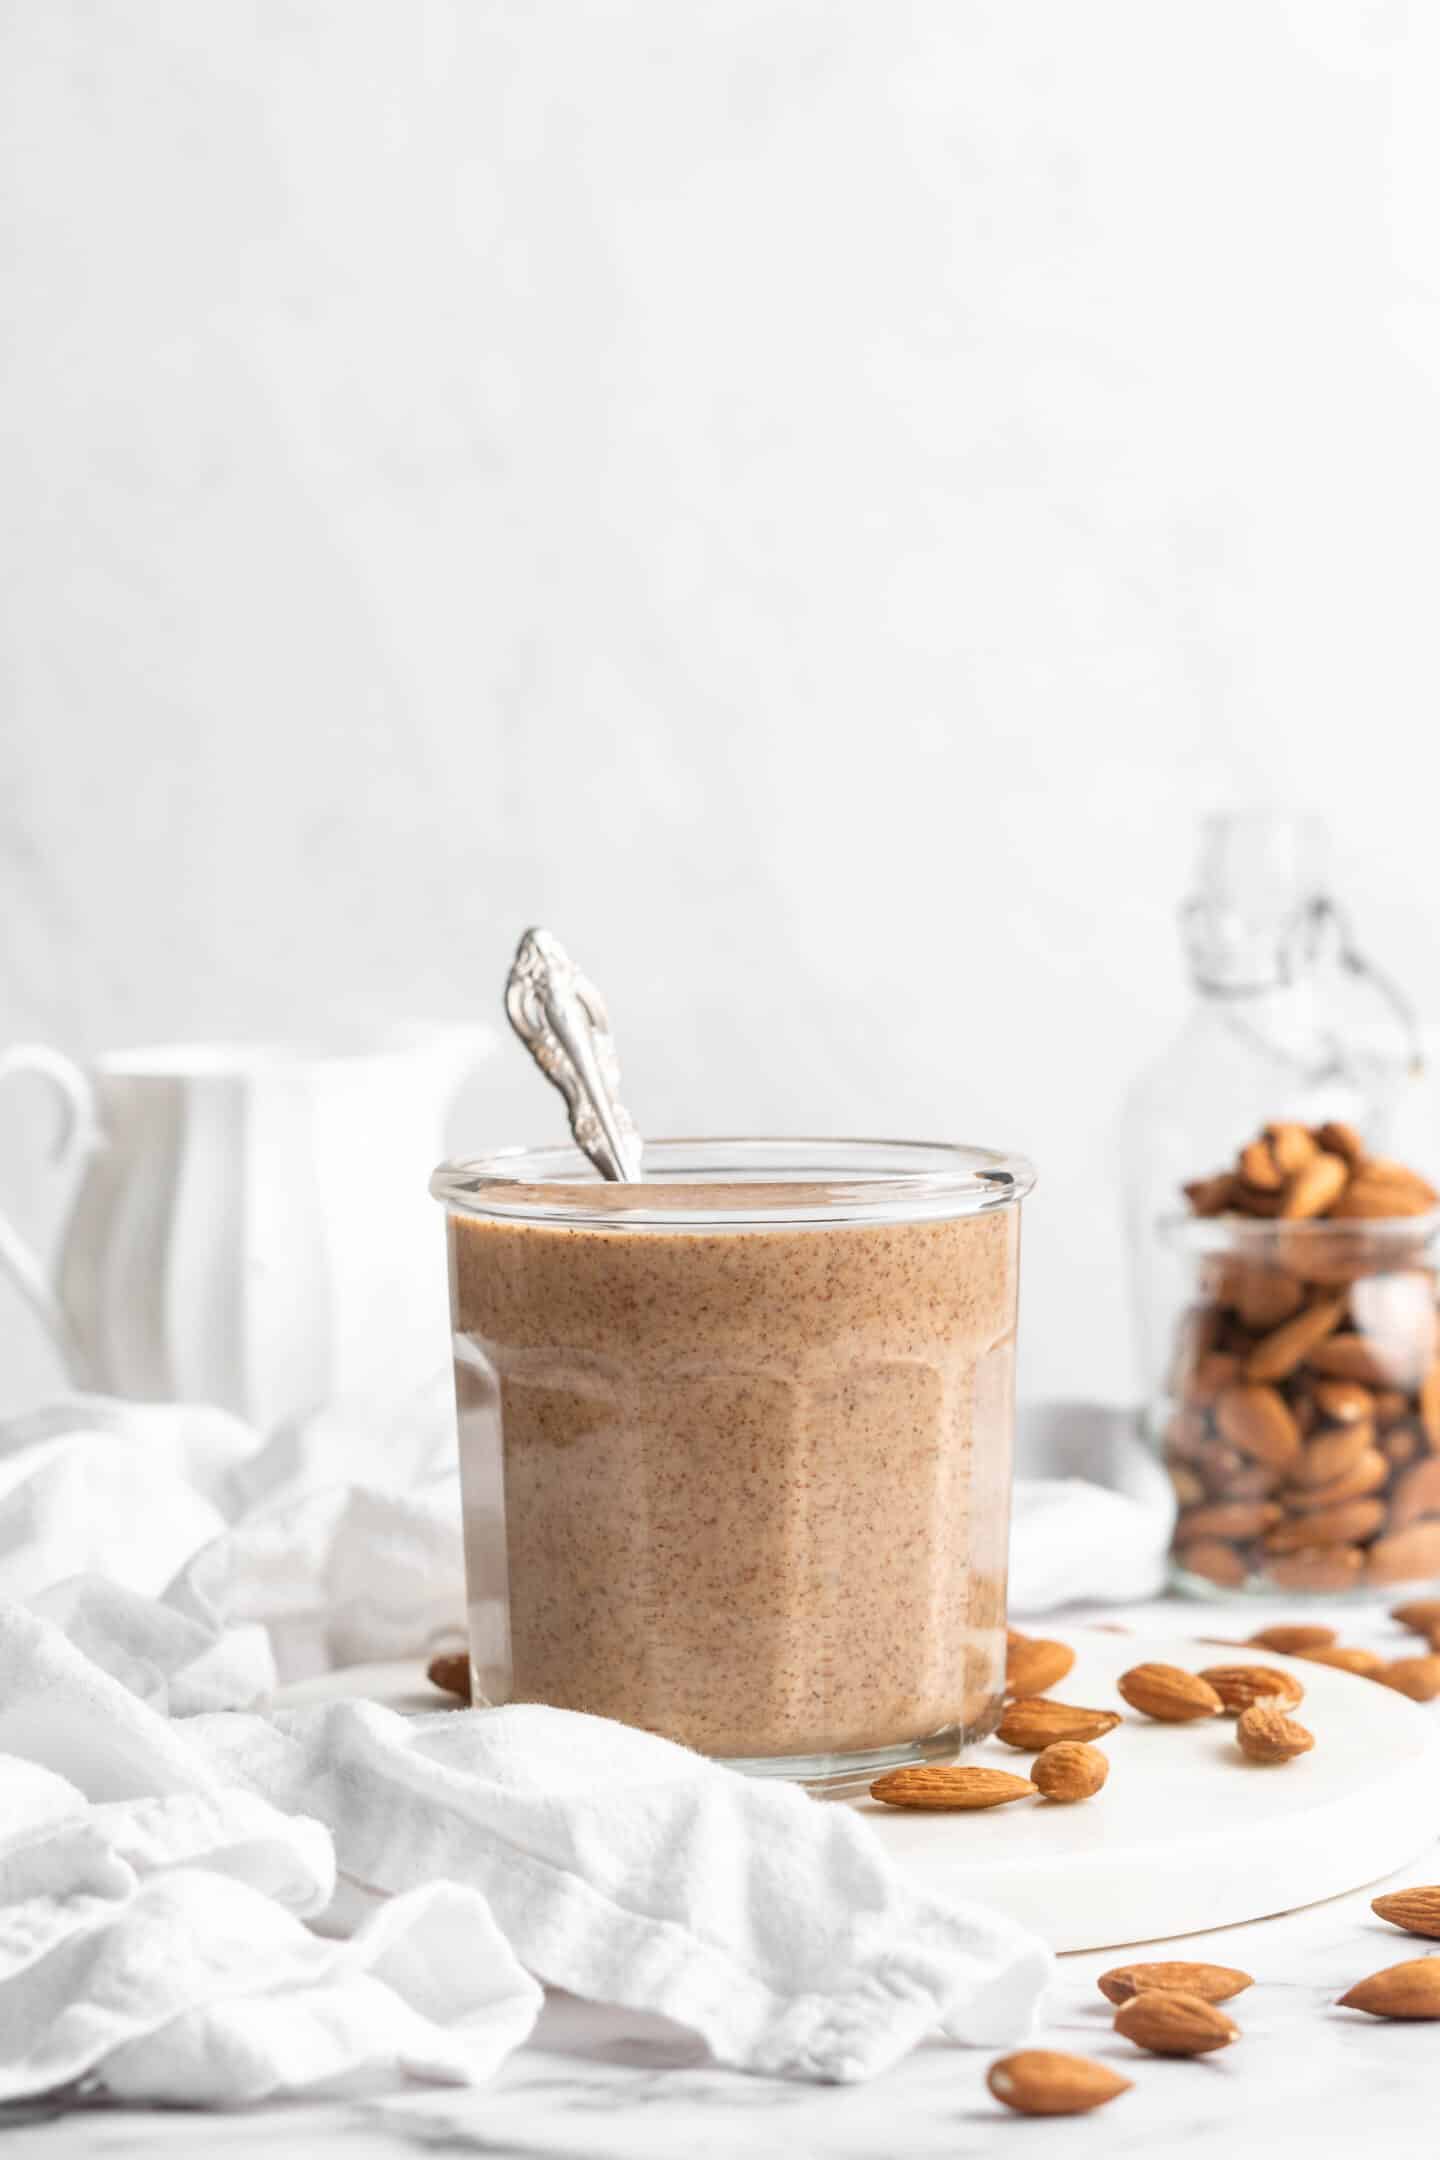 Jar of almond butter with spoon inside